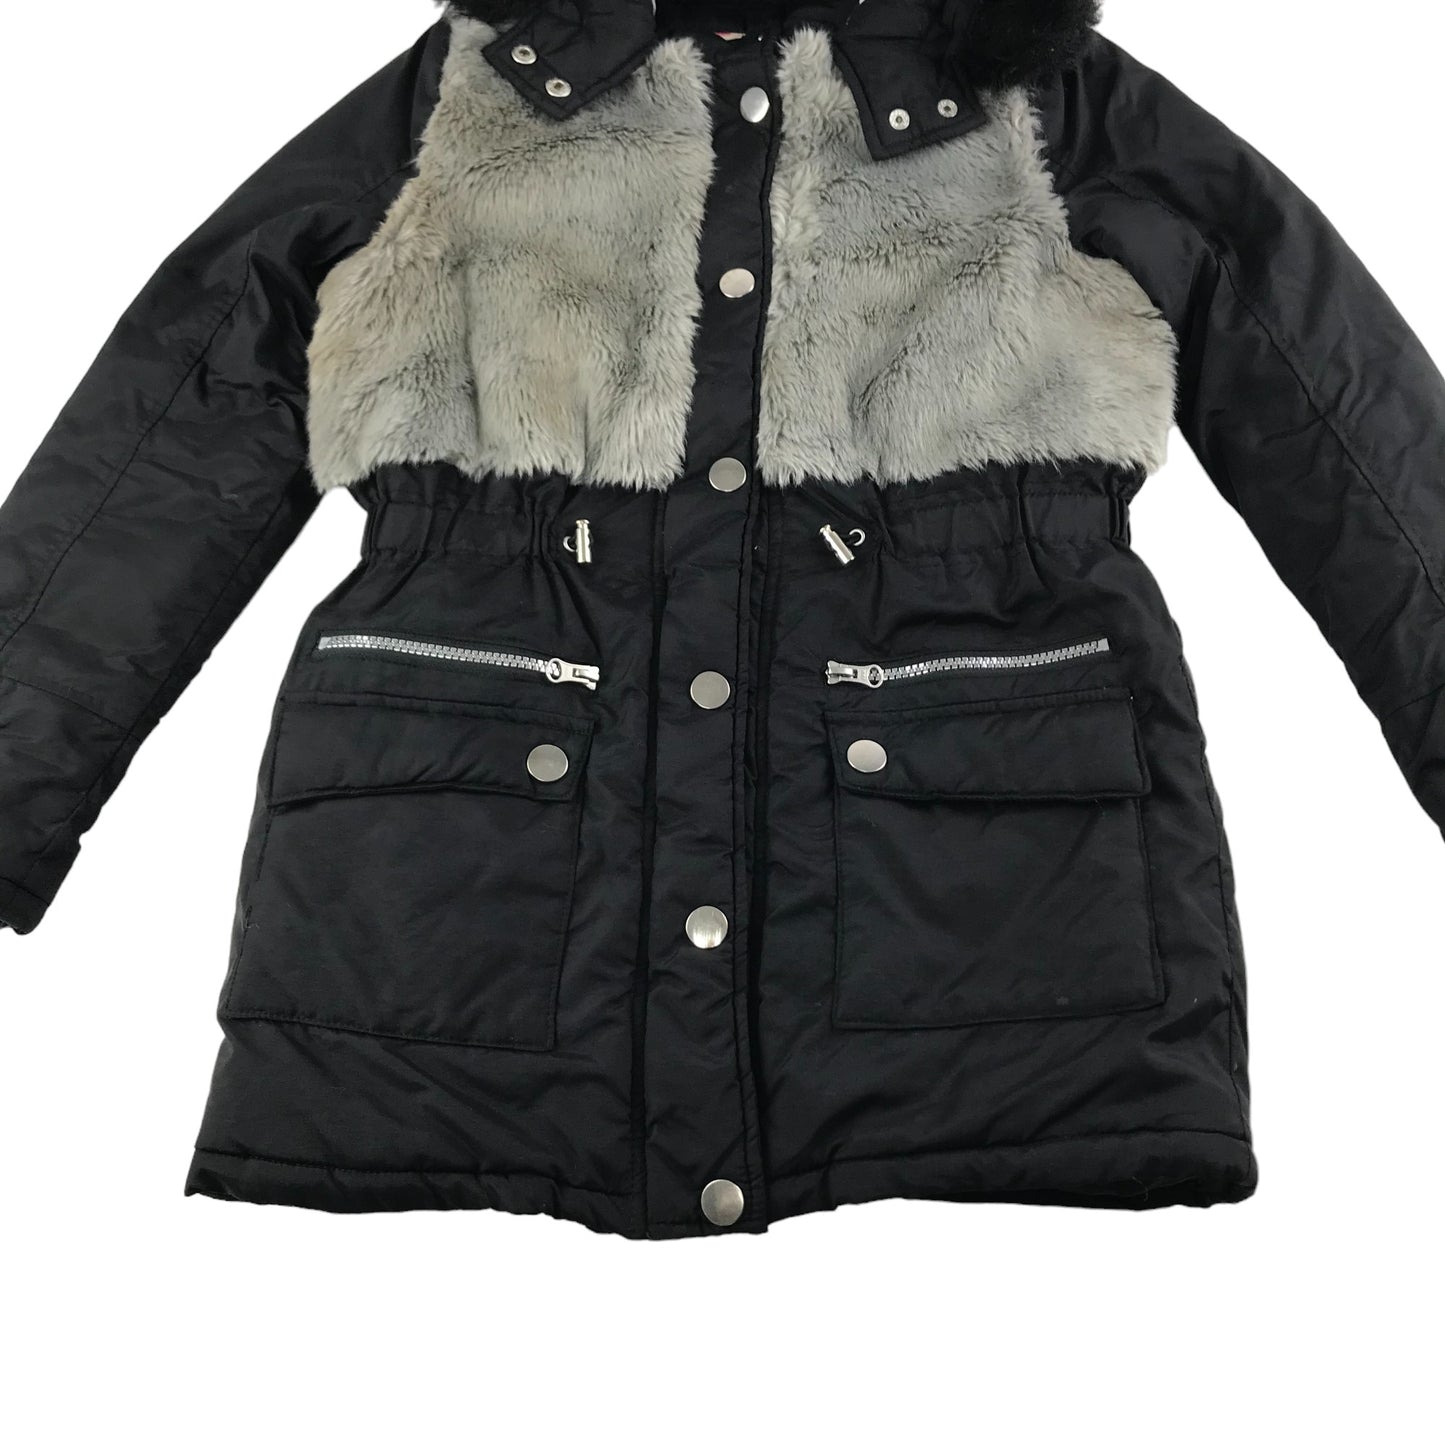 Freespirit Jacket Age 11 Black and Brown Faux Fur Panelled Parka